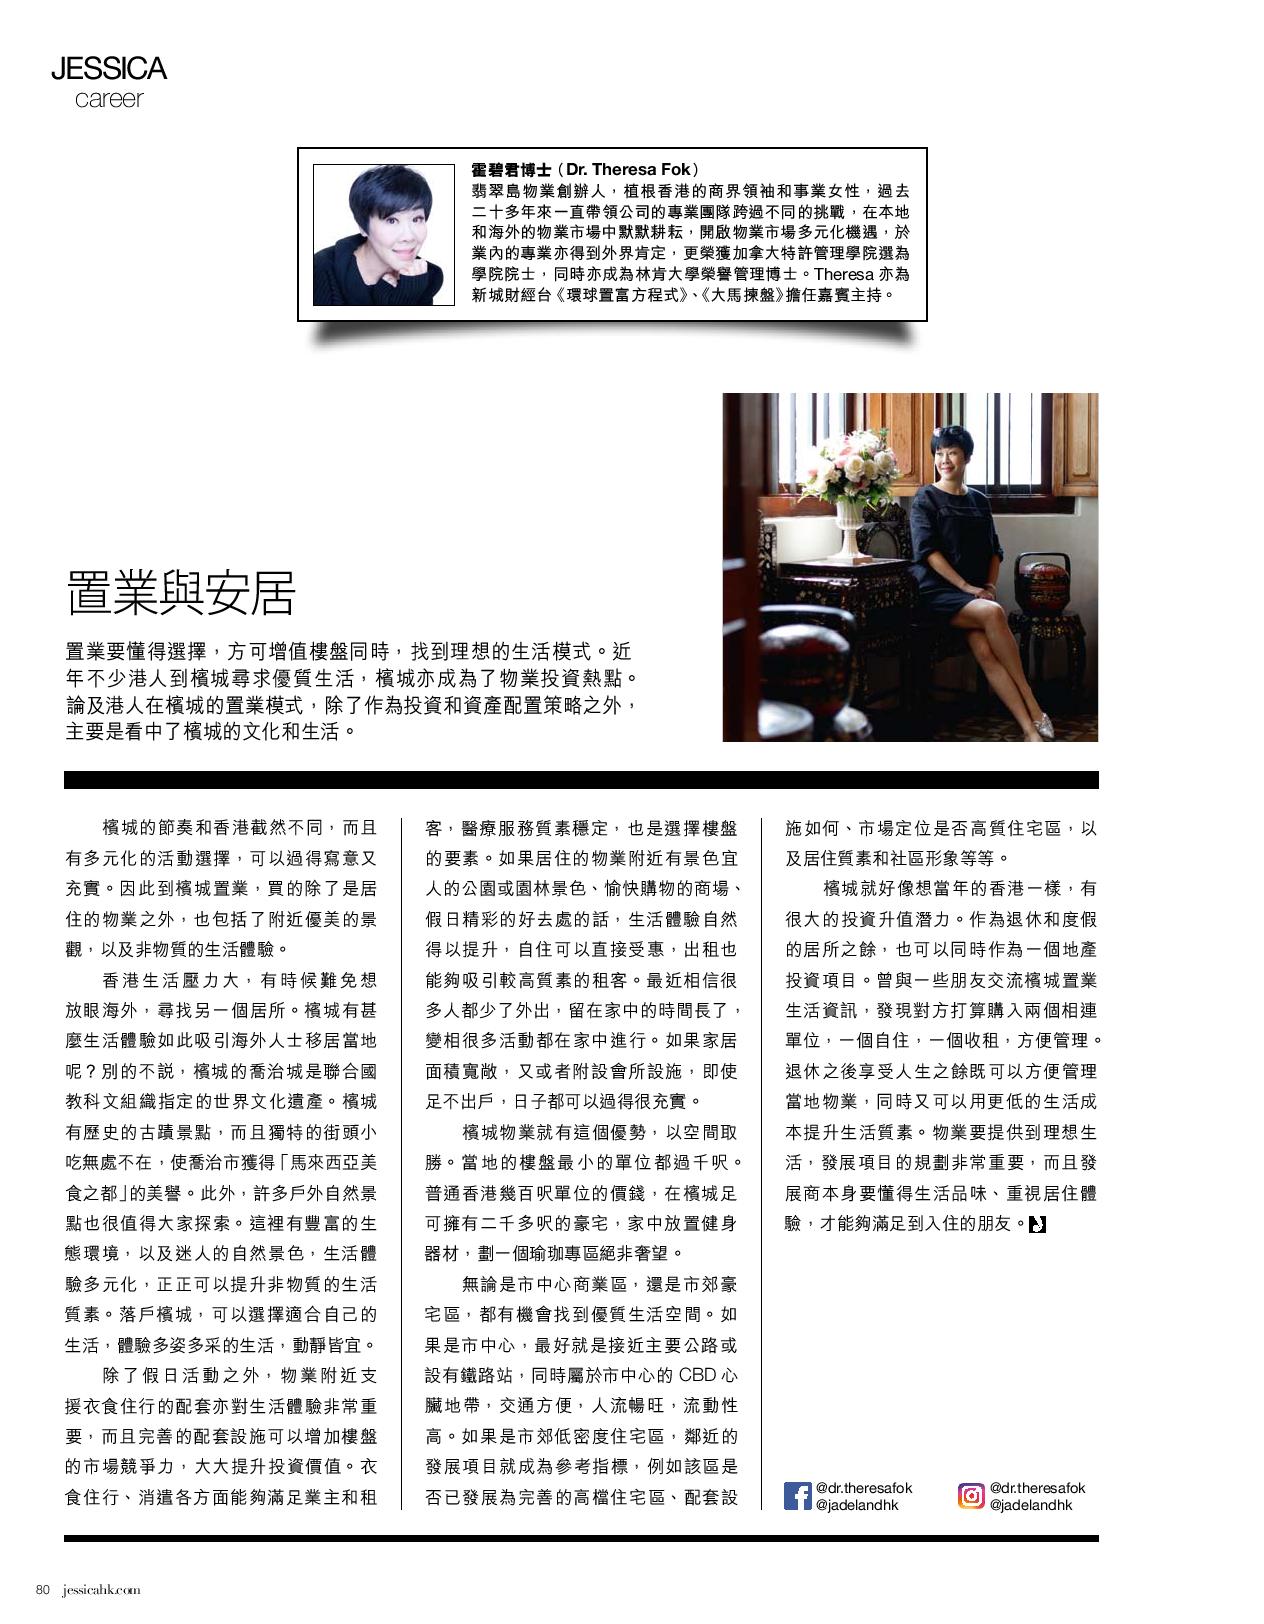 Our Managing Director, Dr. Theresa Fok’s Jessica Magazine – Lifestyle Monthly Column (December 2020)